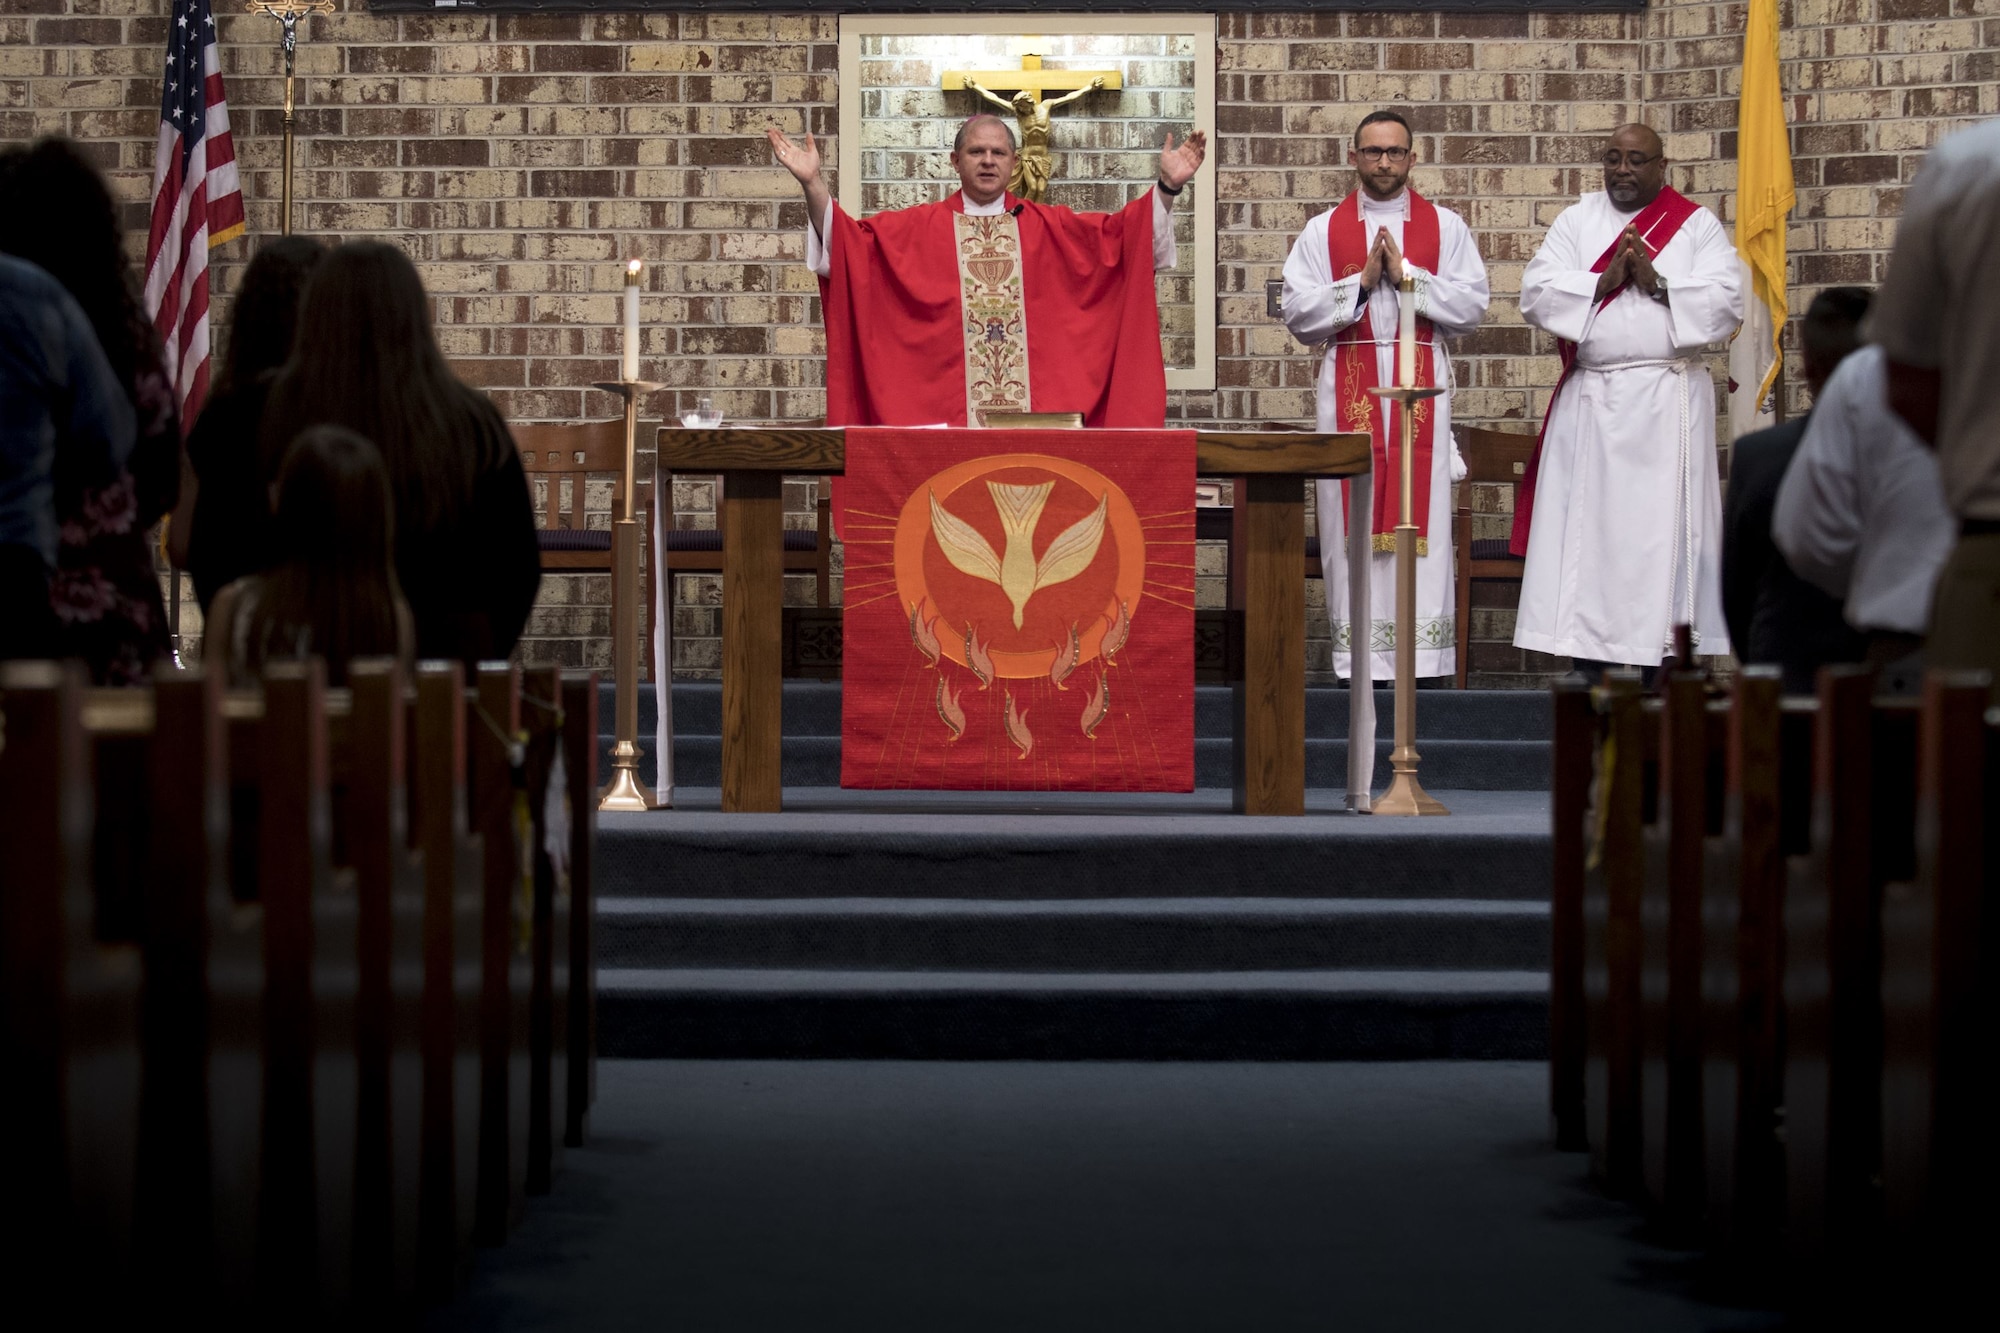 Bishop Robert J. Coyle, Archdiocese of the Military Services, addresses a sanctuary of people, shortly before performing a Sacrament of Confirmation ceremony, Feb. 12, 2018, at Moody Air Force Base, Ga. Confirmation is the sacrament by which Catholics believe the Holy Spirit gives them the increased ability to practice their faith in every aspect of their lives and to witness Christ in every situation.  The Sacrament of Confirmation helps a person remain faithful to his or her baptismal commitment to witness to Christ and to serve others. (U.S. Air Force photo by Senior Airman Daniel Snider)